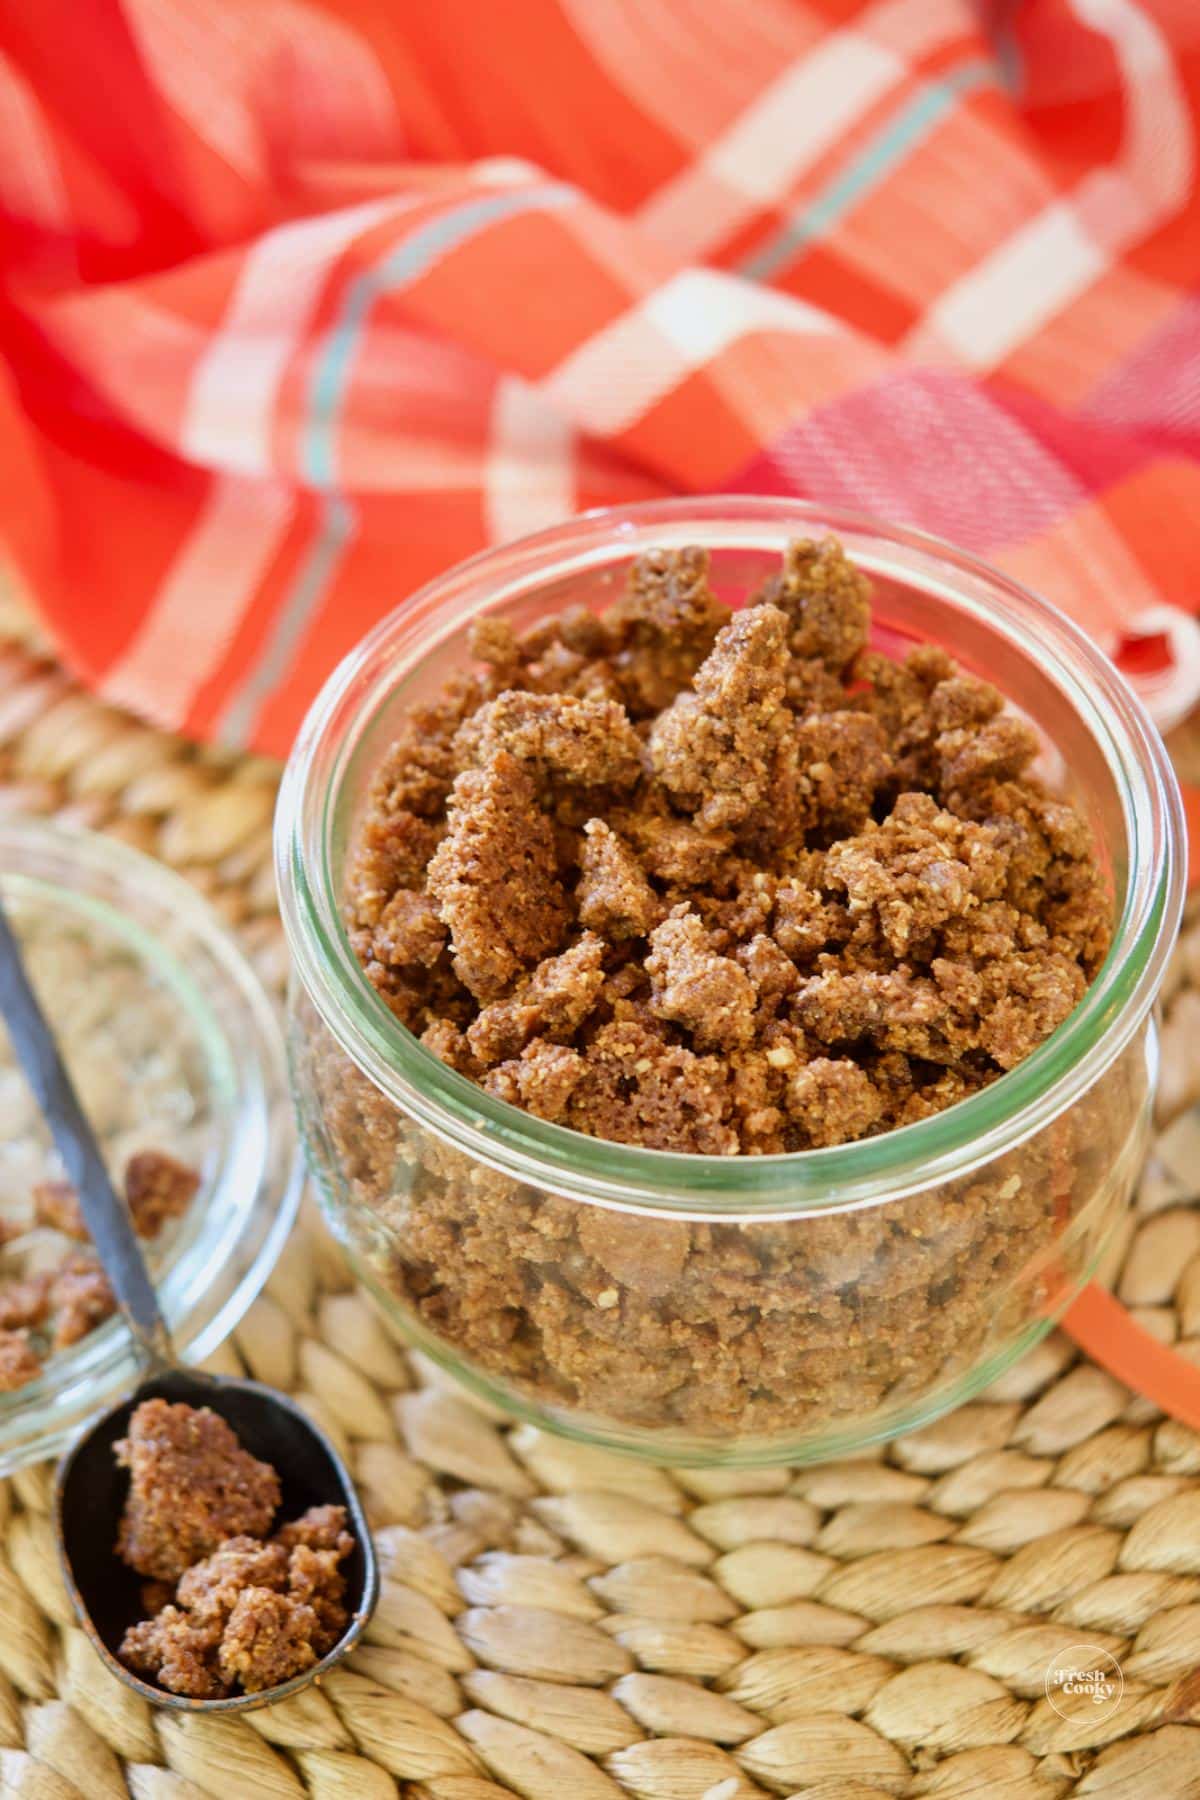 Graham cracker crunch topping in jar with spoonful.